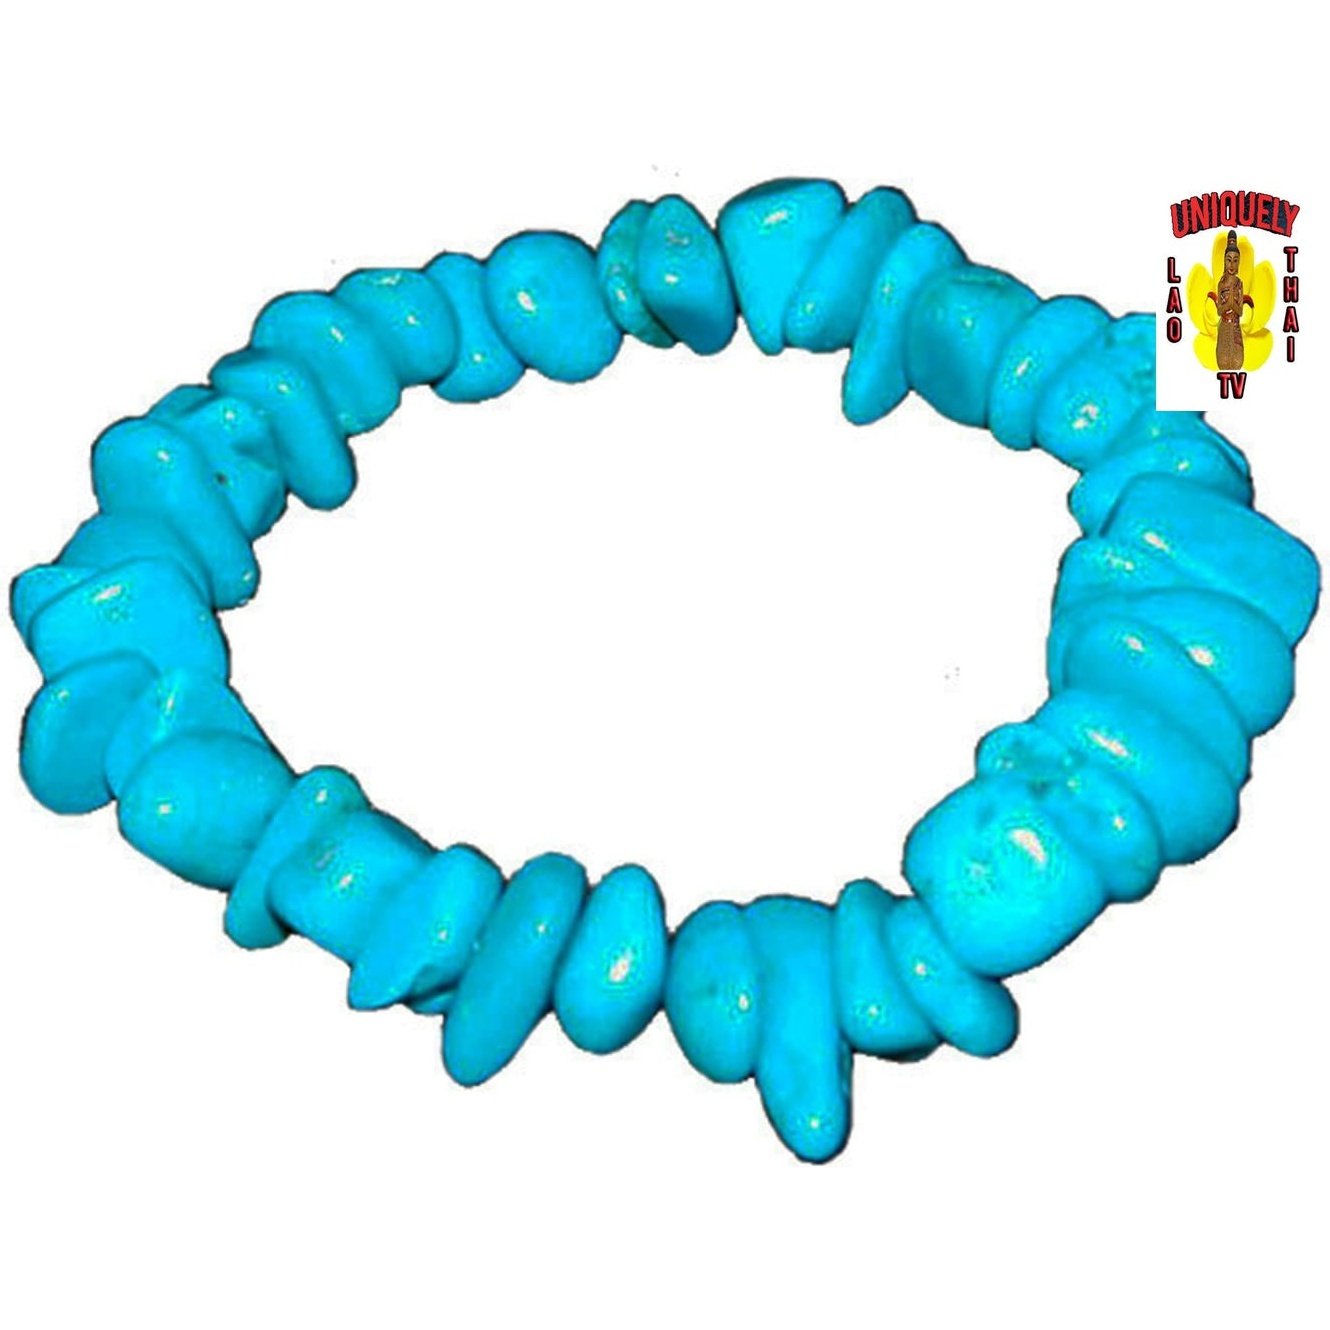 Turquoise Bracelet Stretch Band which Fits Most Wrists